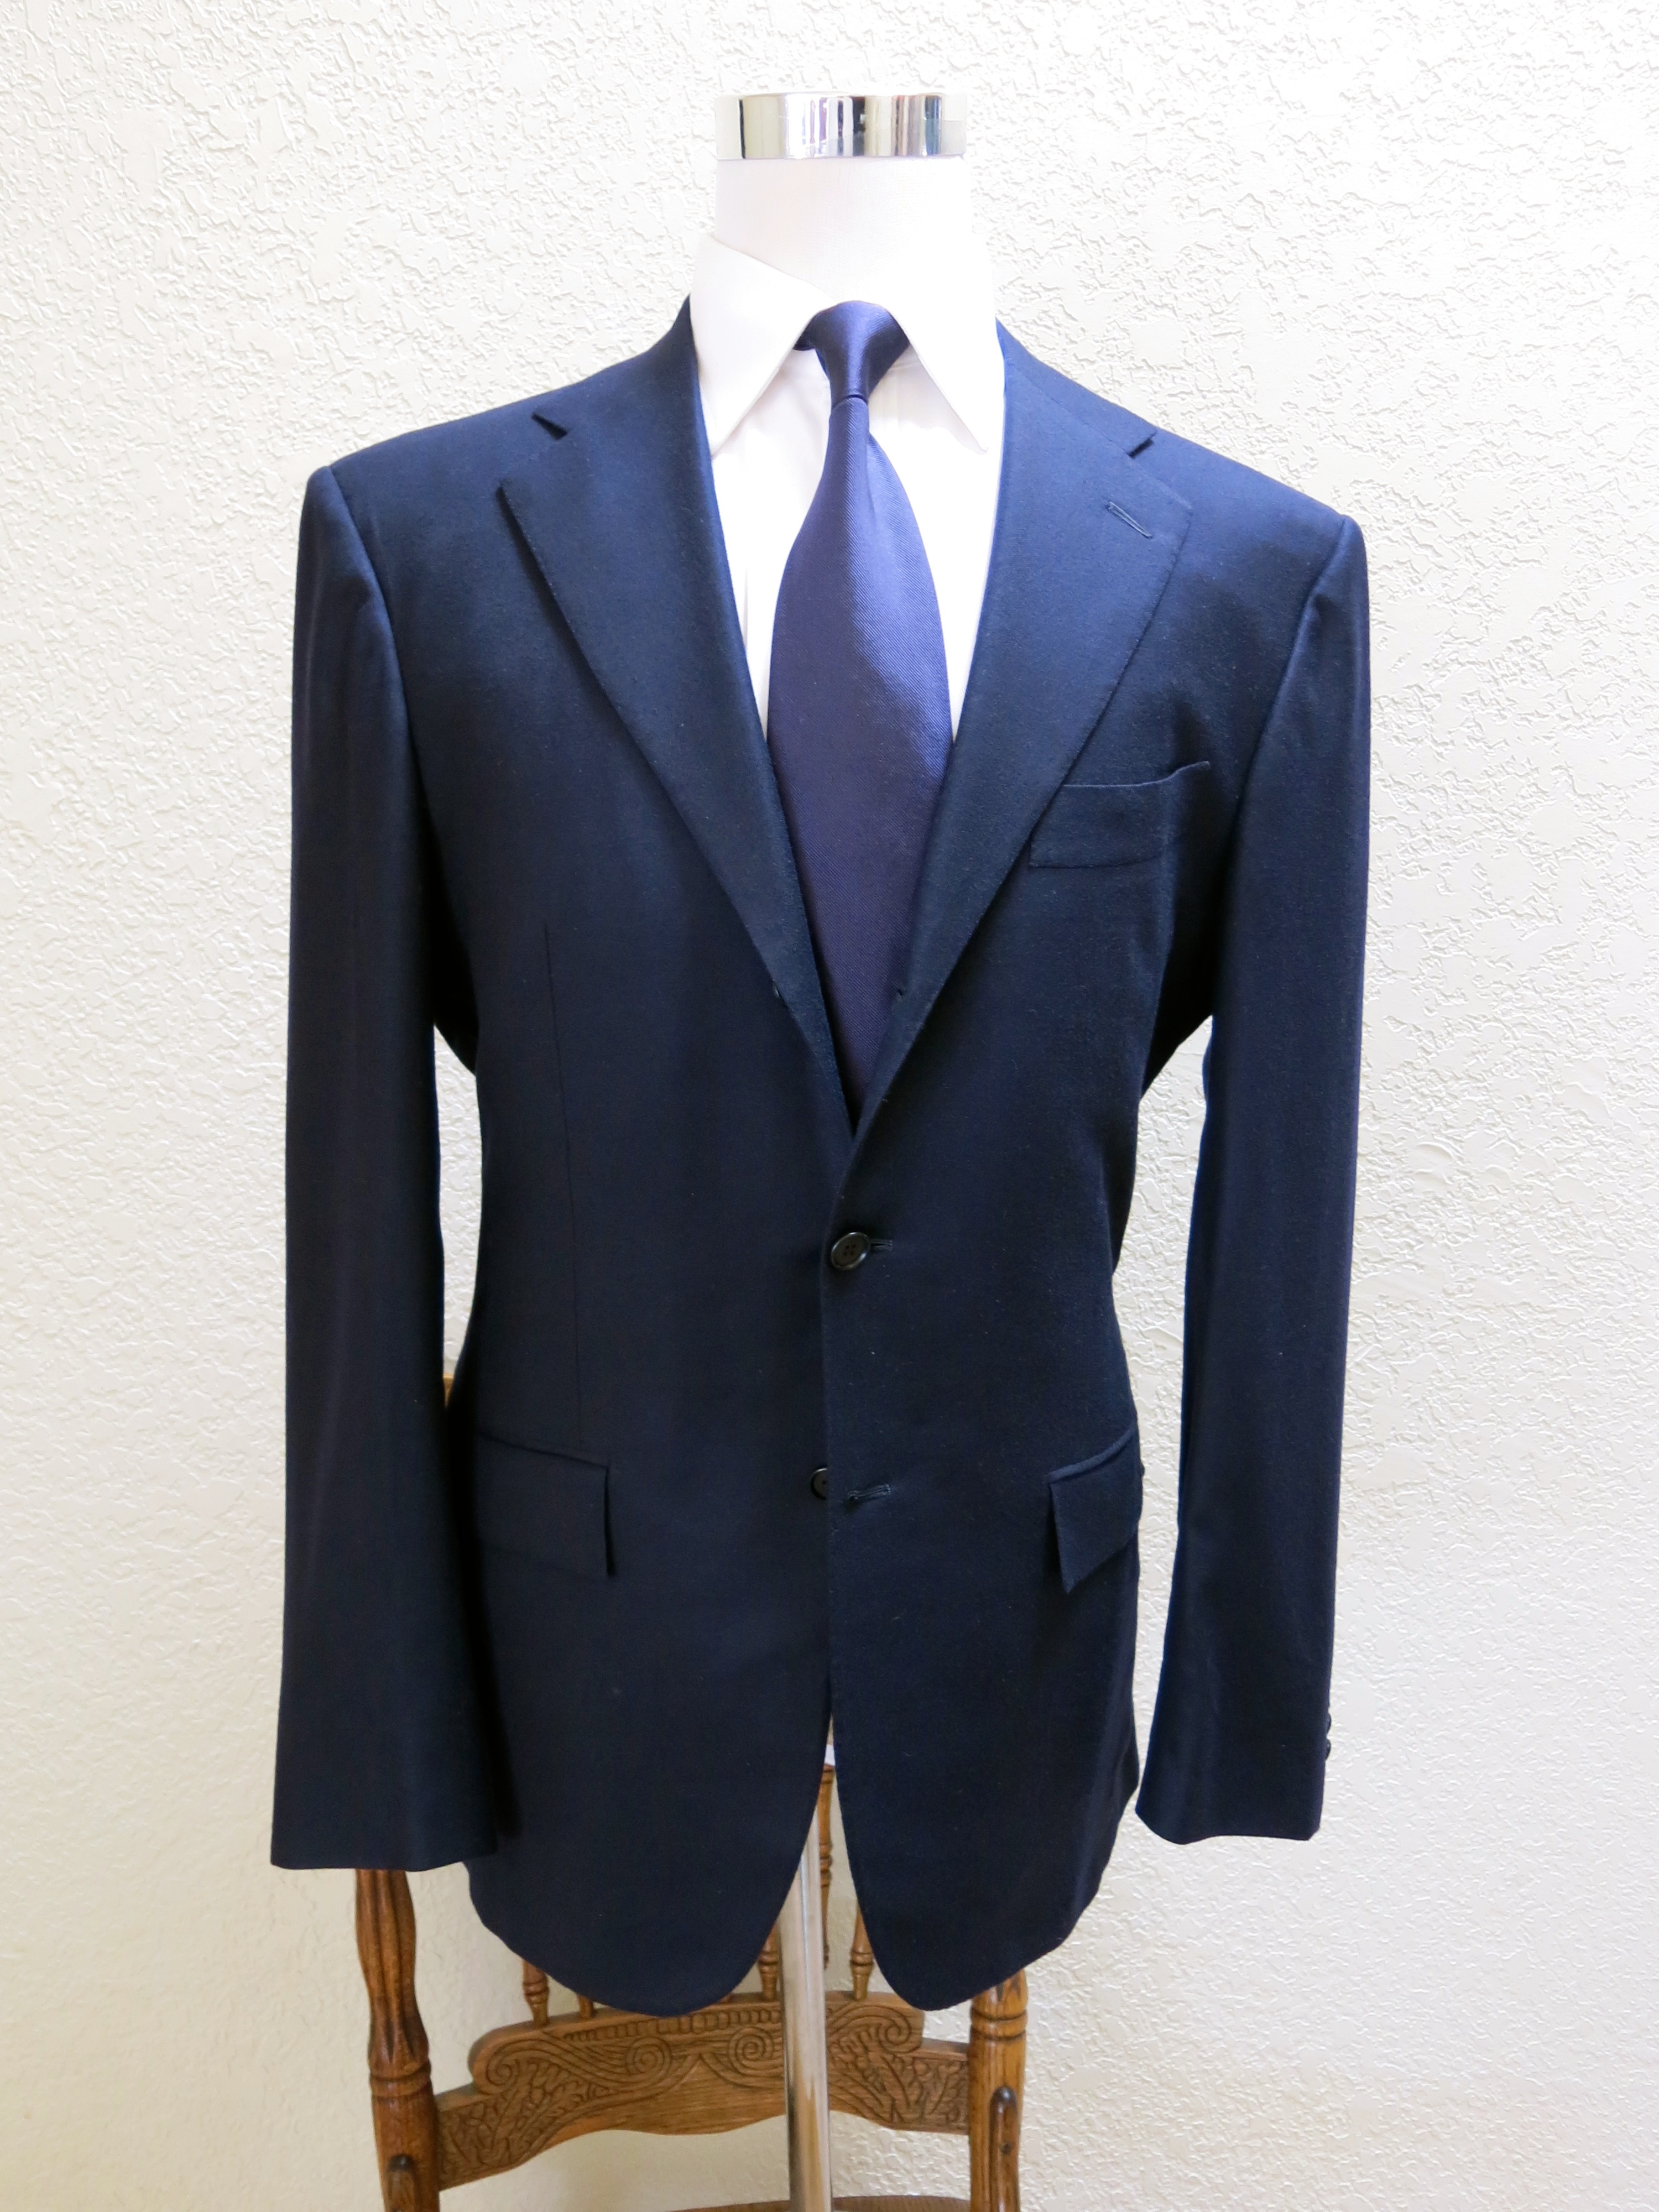 NWT 2014-2015 97% VICUNA SOLID NAVY KITON SUIT :) 44R | Styleforum